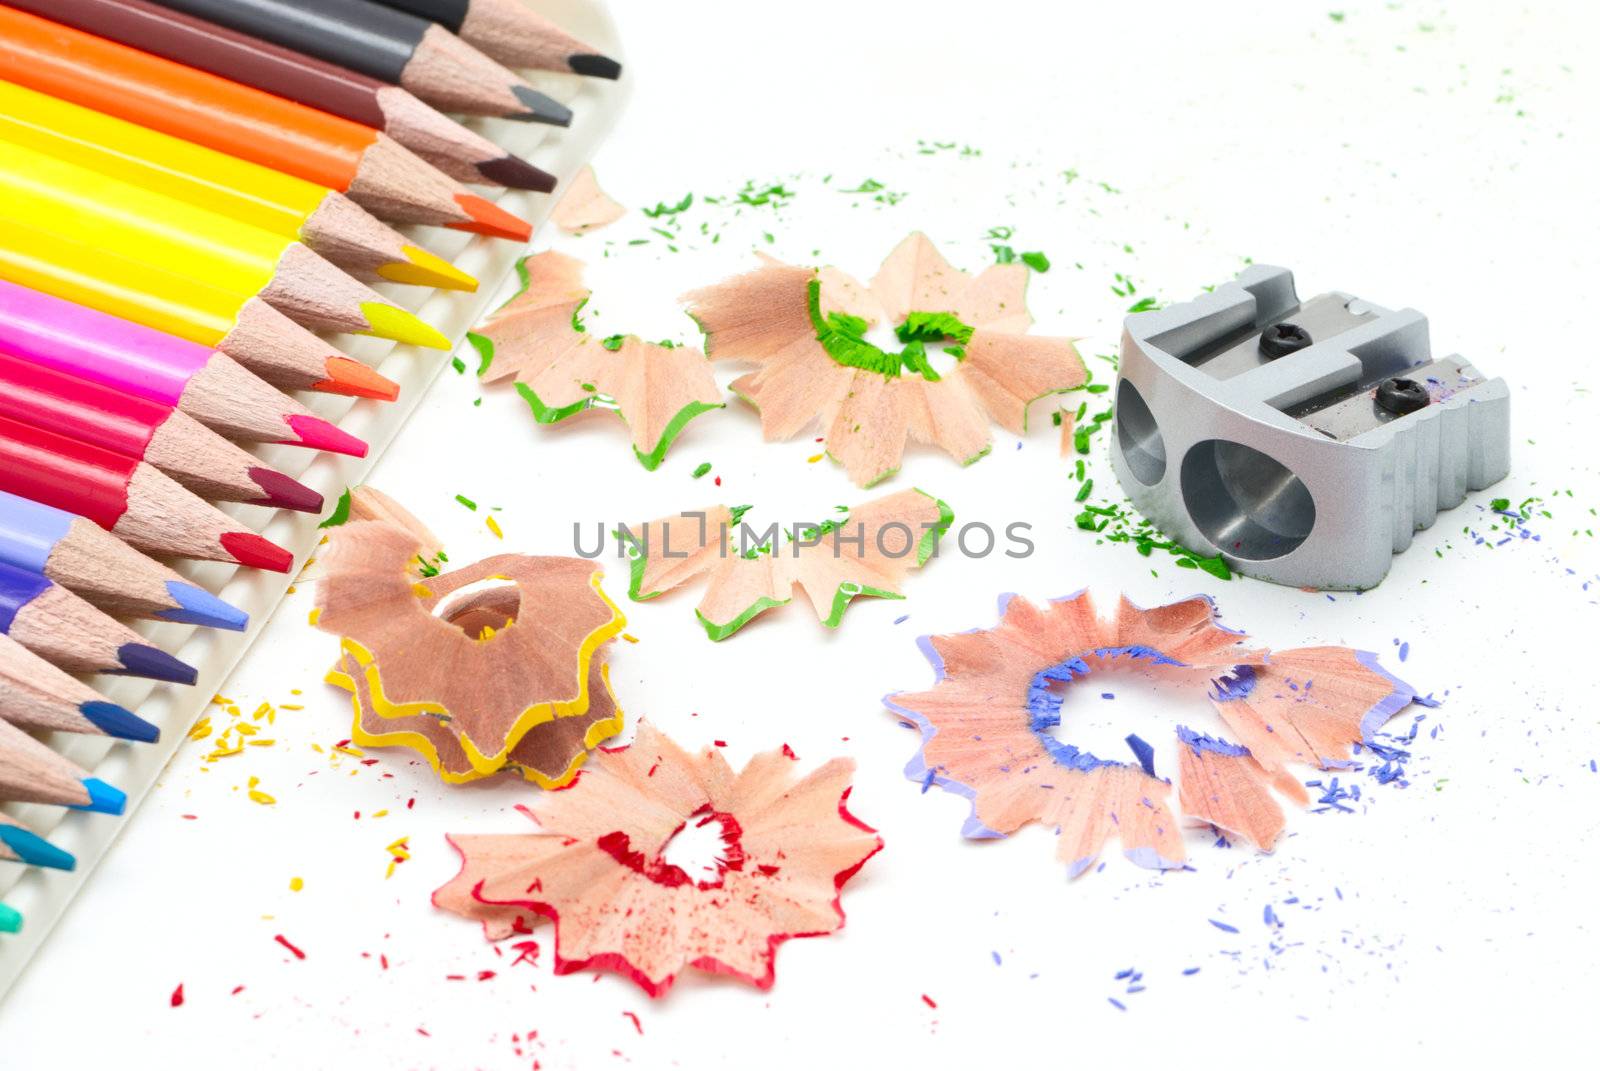 Sharpener with colored pencils and shavings